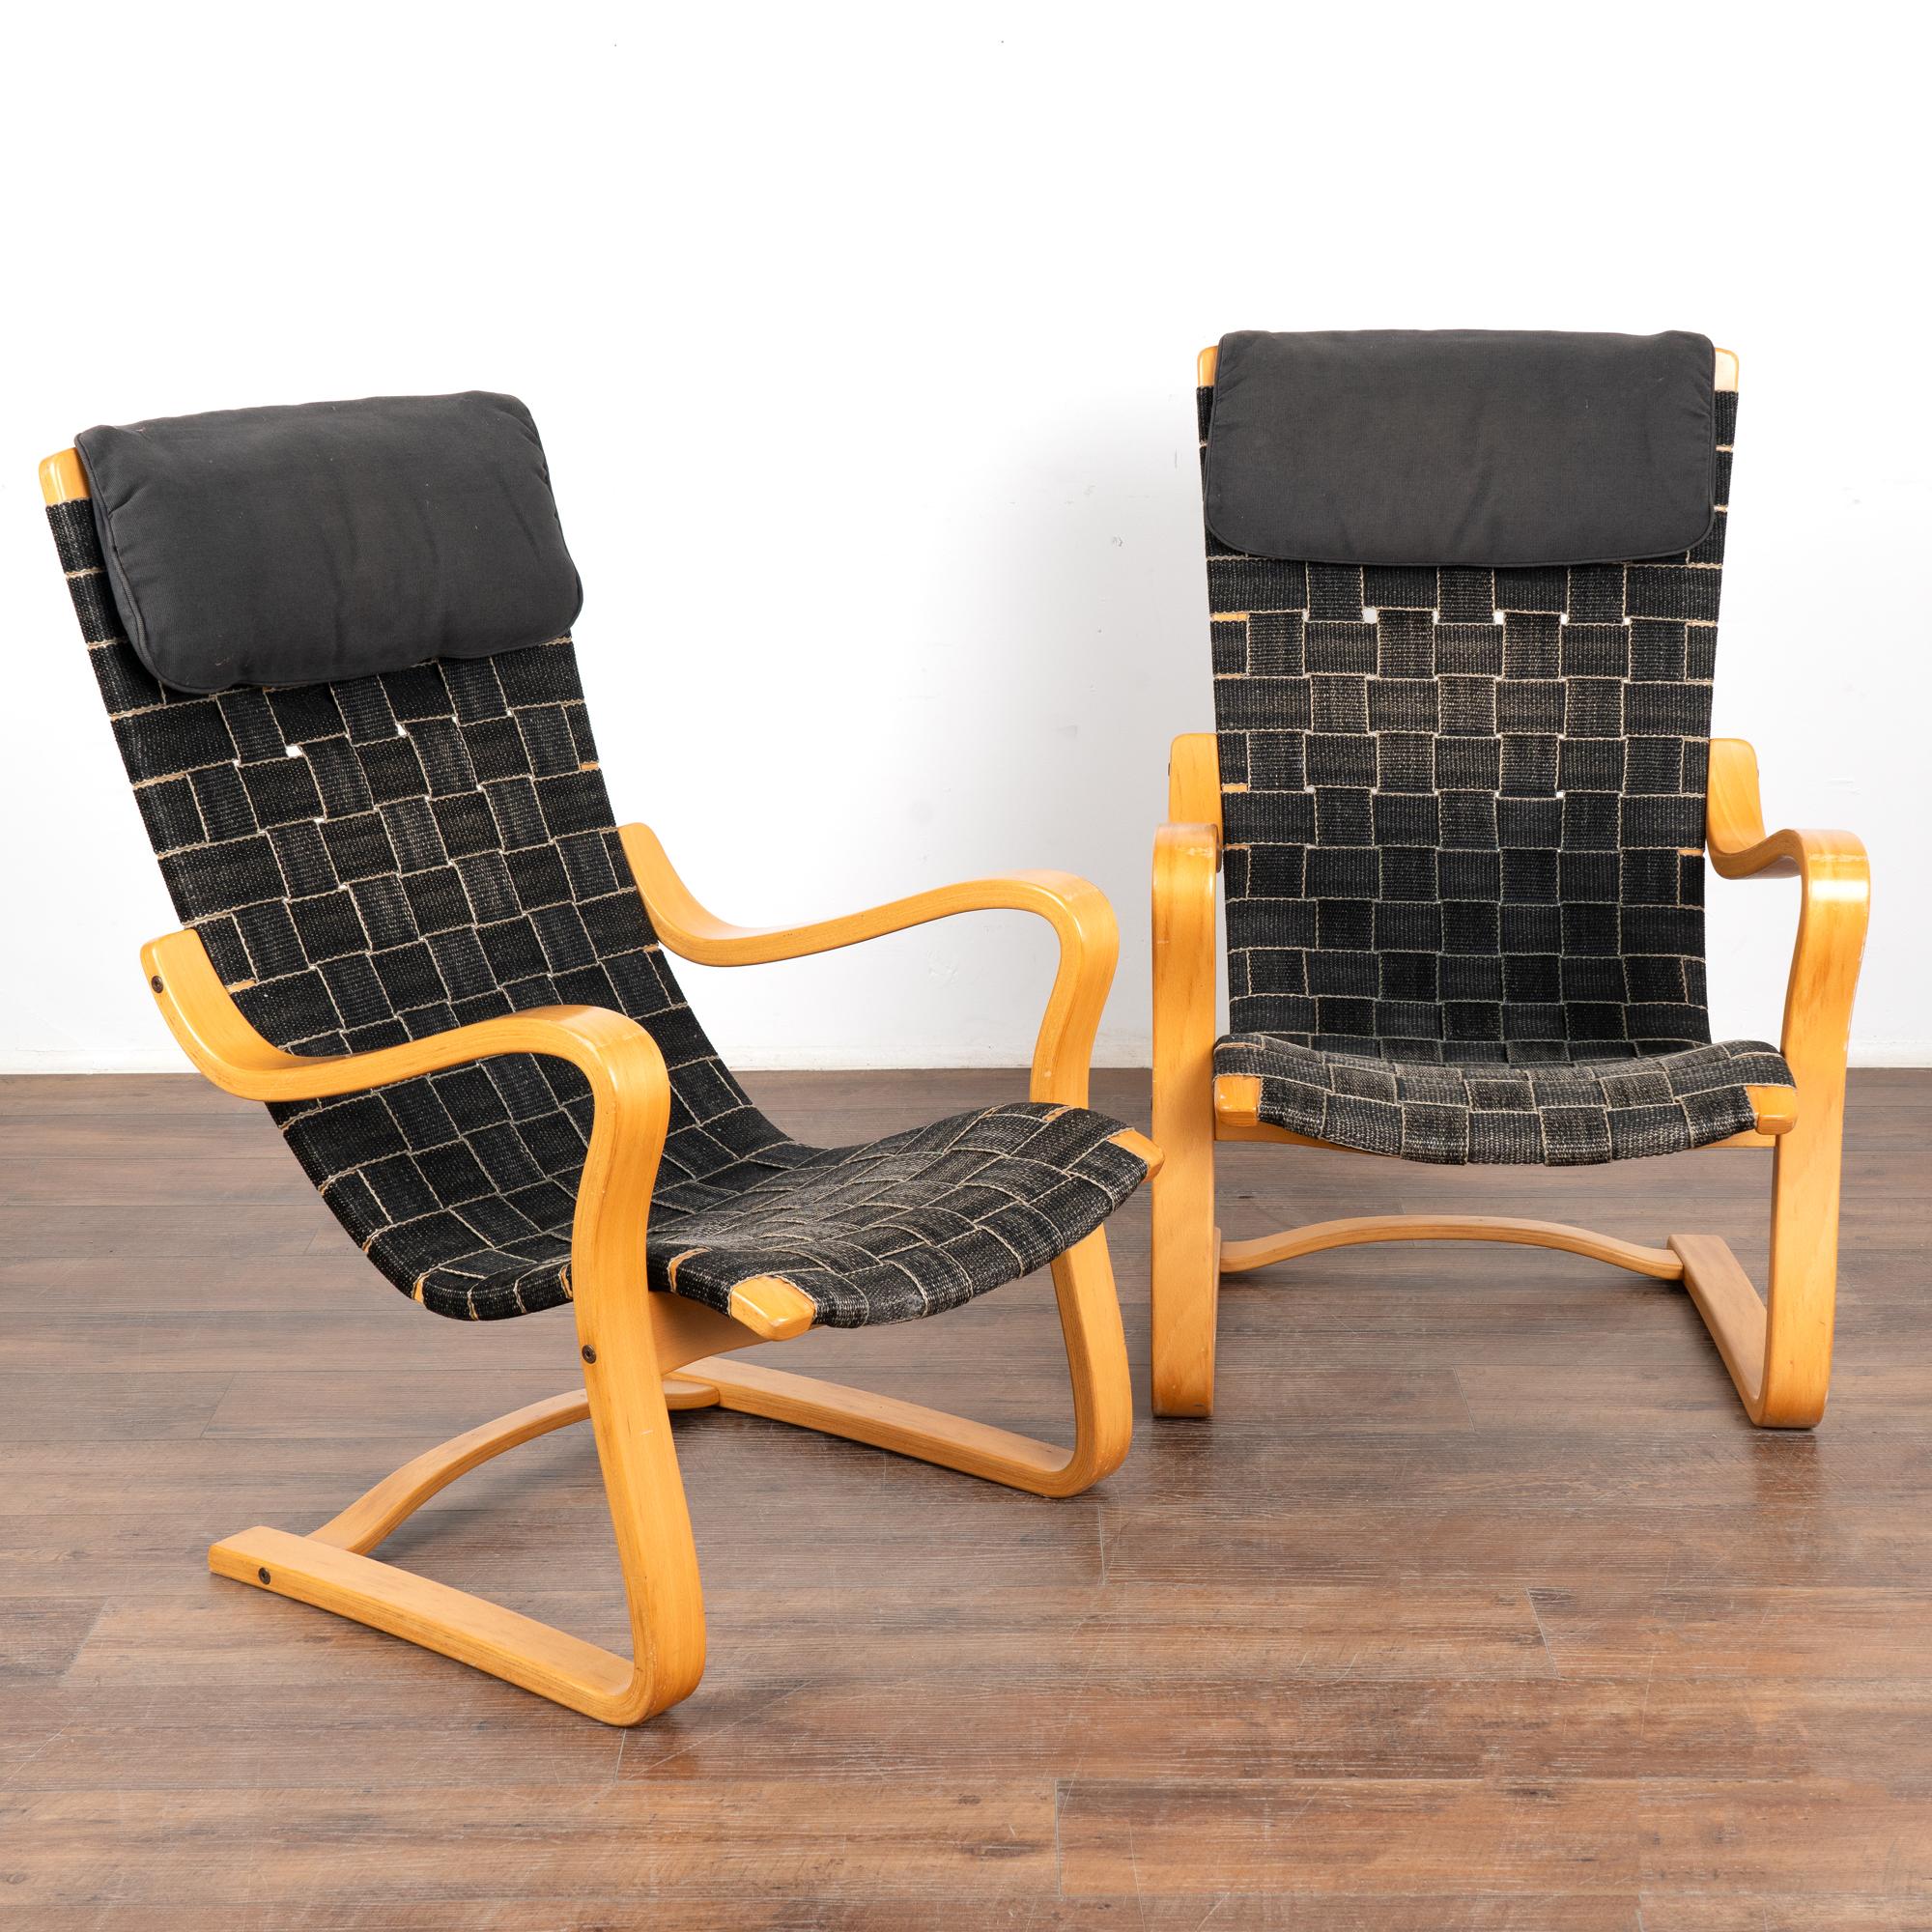 Pair of mid-century modern cantilever lounge chairs with original black webbing on a traditional molded beech wood frame. No makers mark.
Black webbing shows typical age-related fading and wear, particularly around seat front.
Head rest is attatched